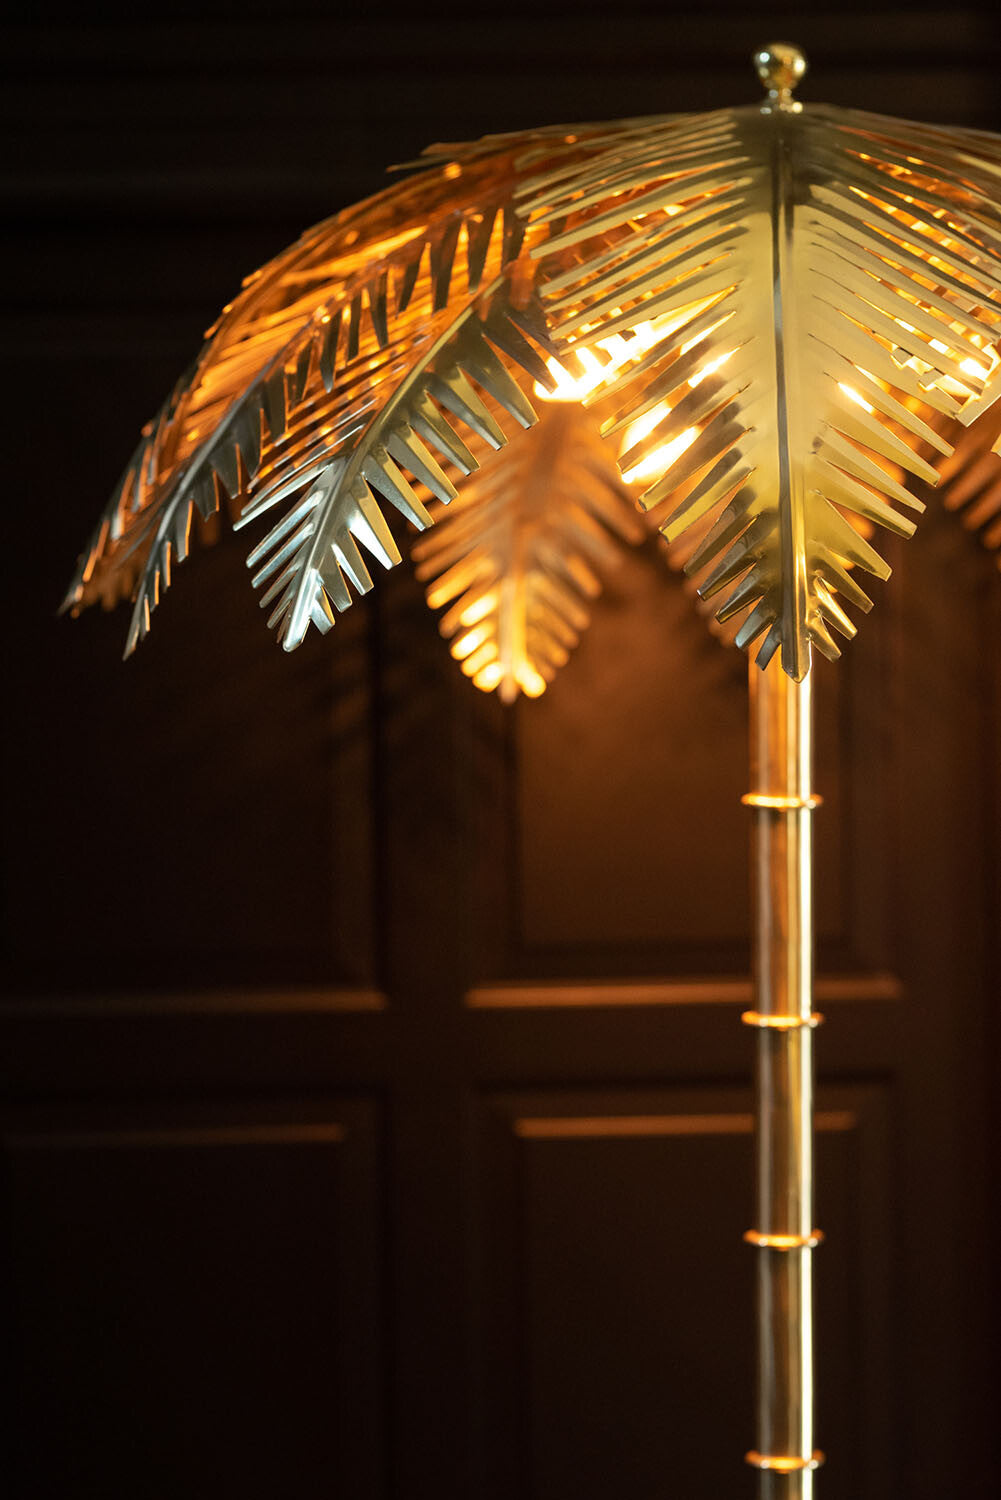 TABLE LAMP COCONUT LEAVES STEEL GOLD